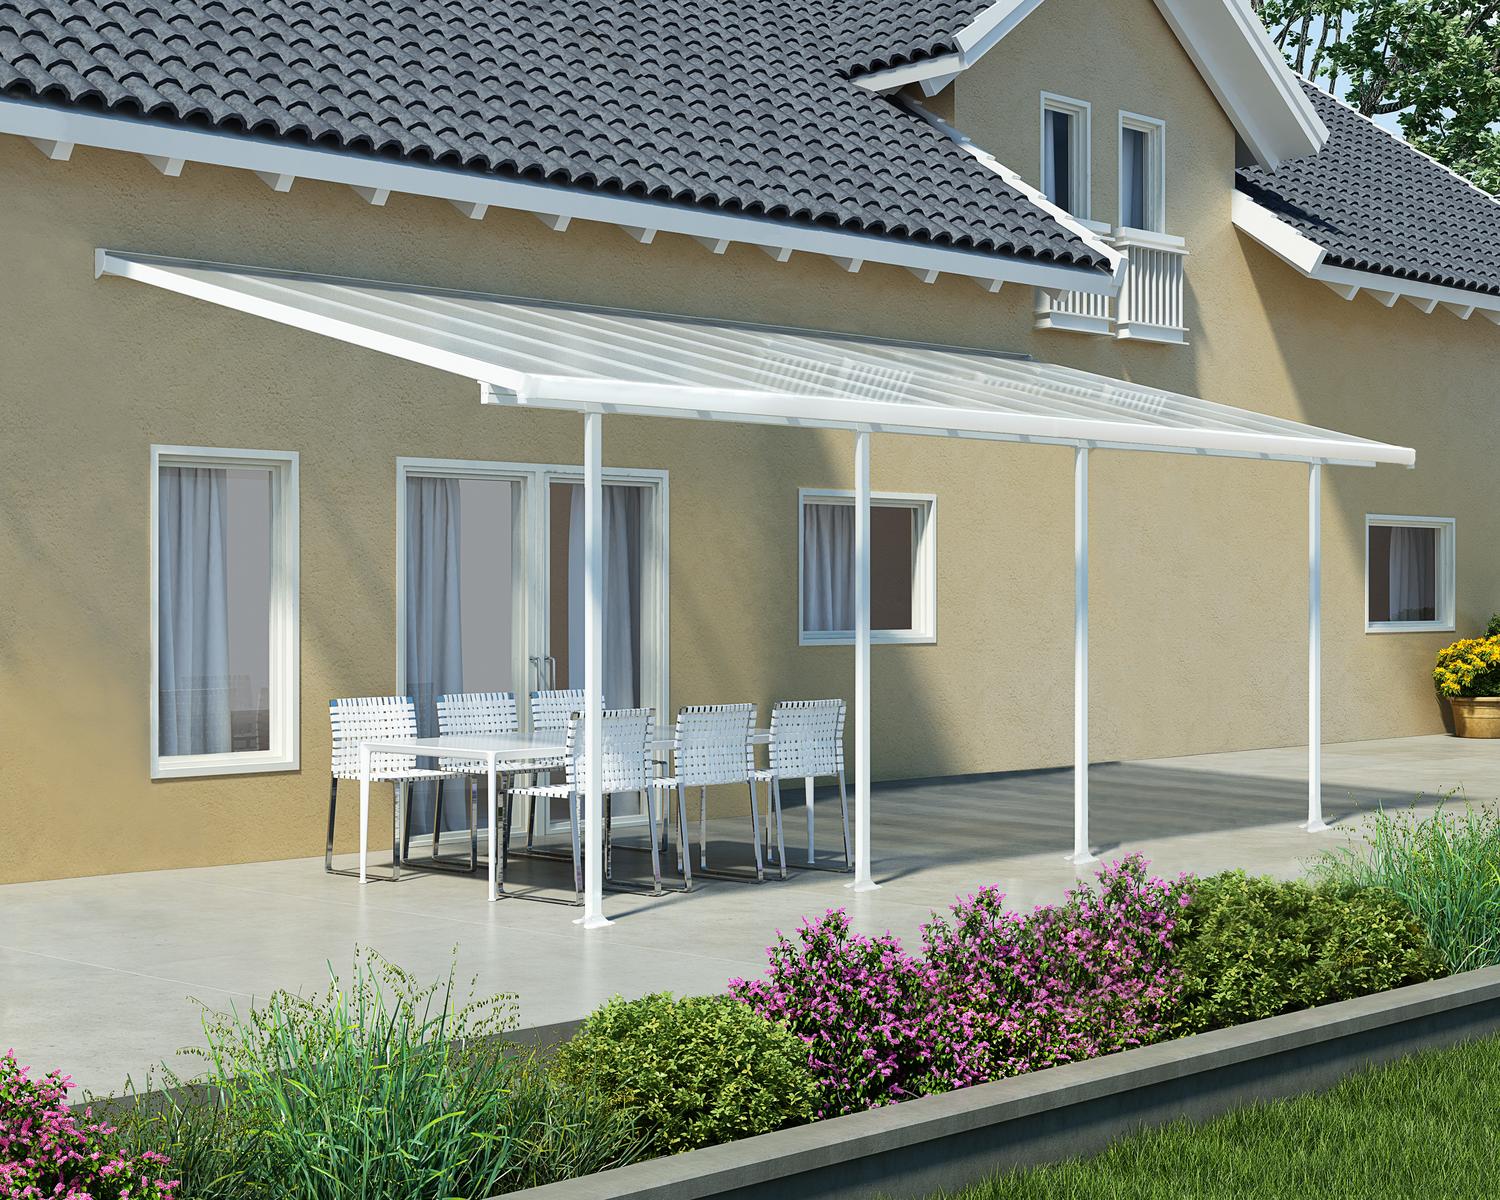 Patio Cover 10 ft. x 24 ft. Aluminium White with Polycarbonate roof panels, attached to the house to protect patio furniture